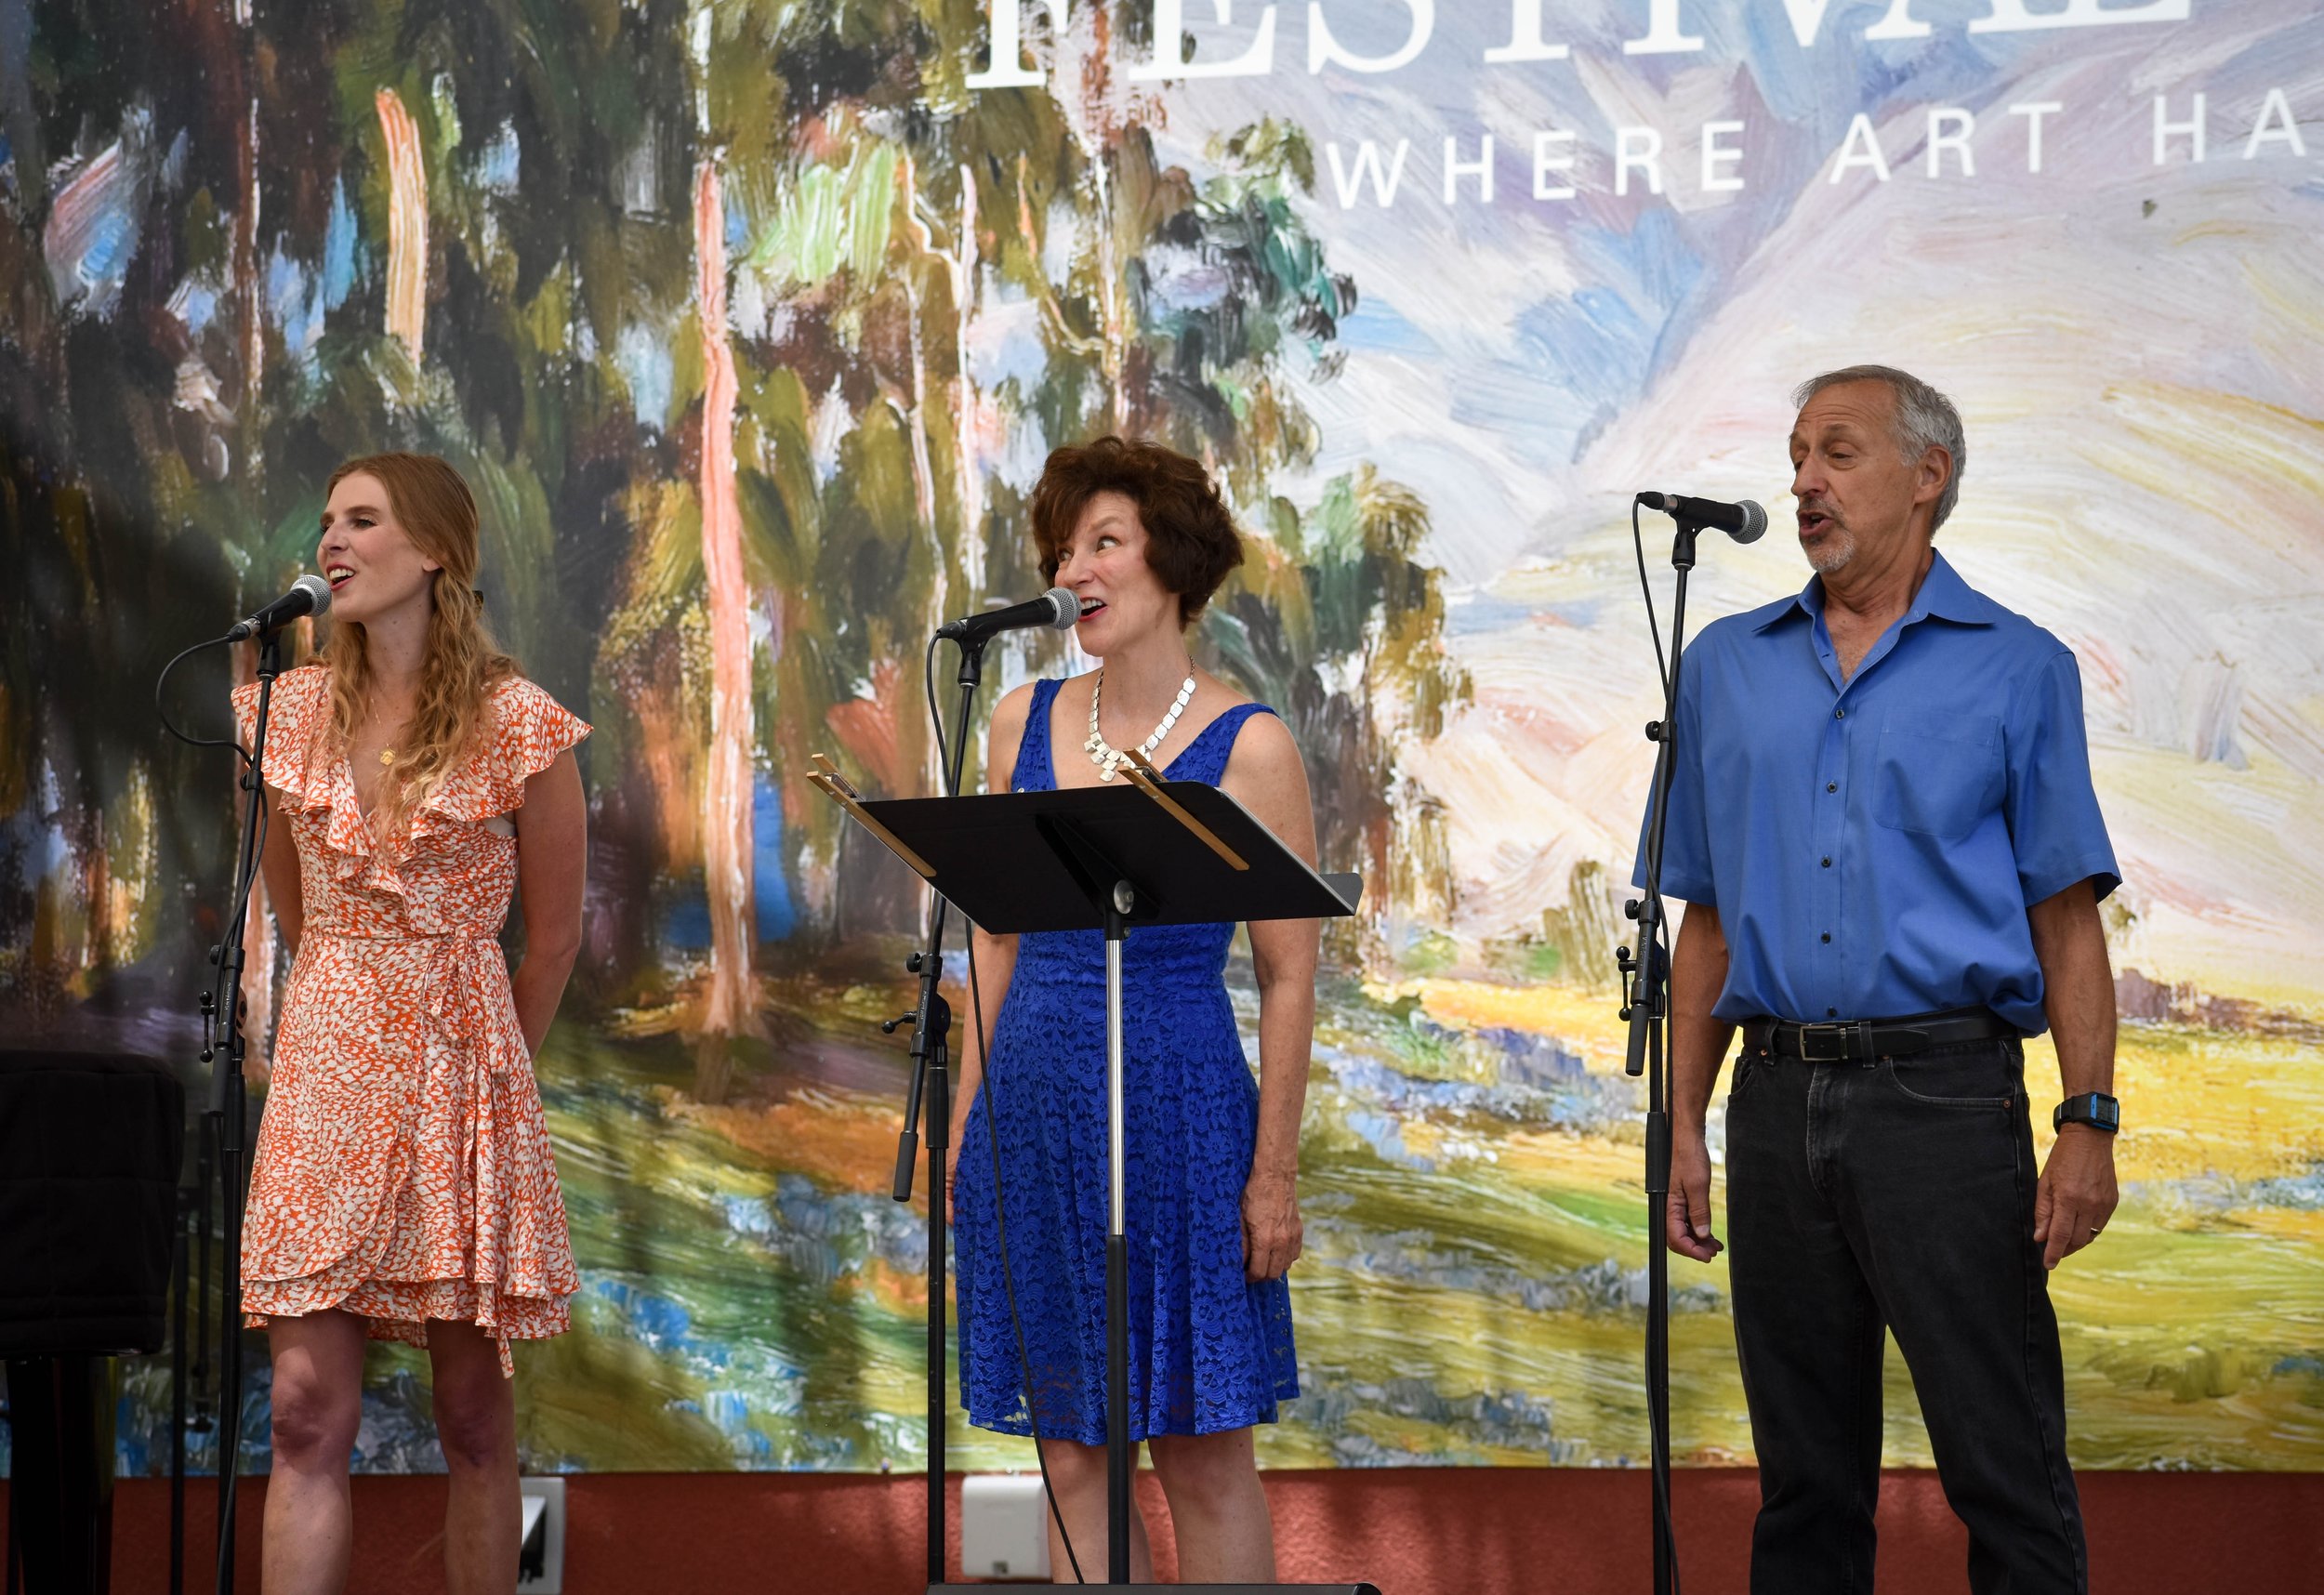 07-17-2022 LCCB Fest of Arts Summer Concert Series by Peyton Webster79-36.jpg